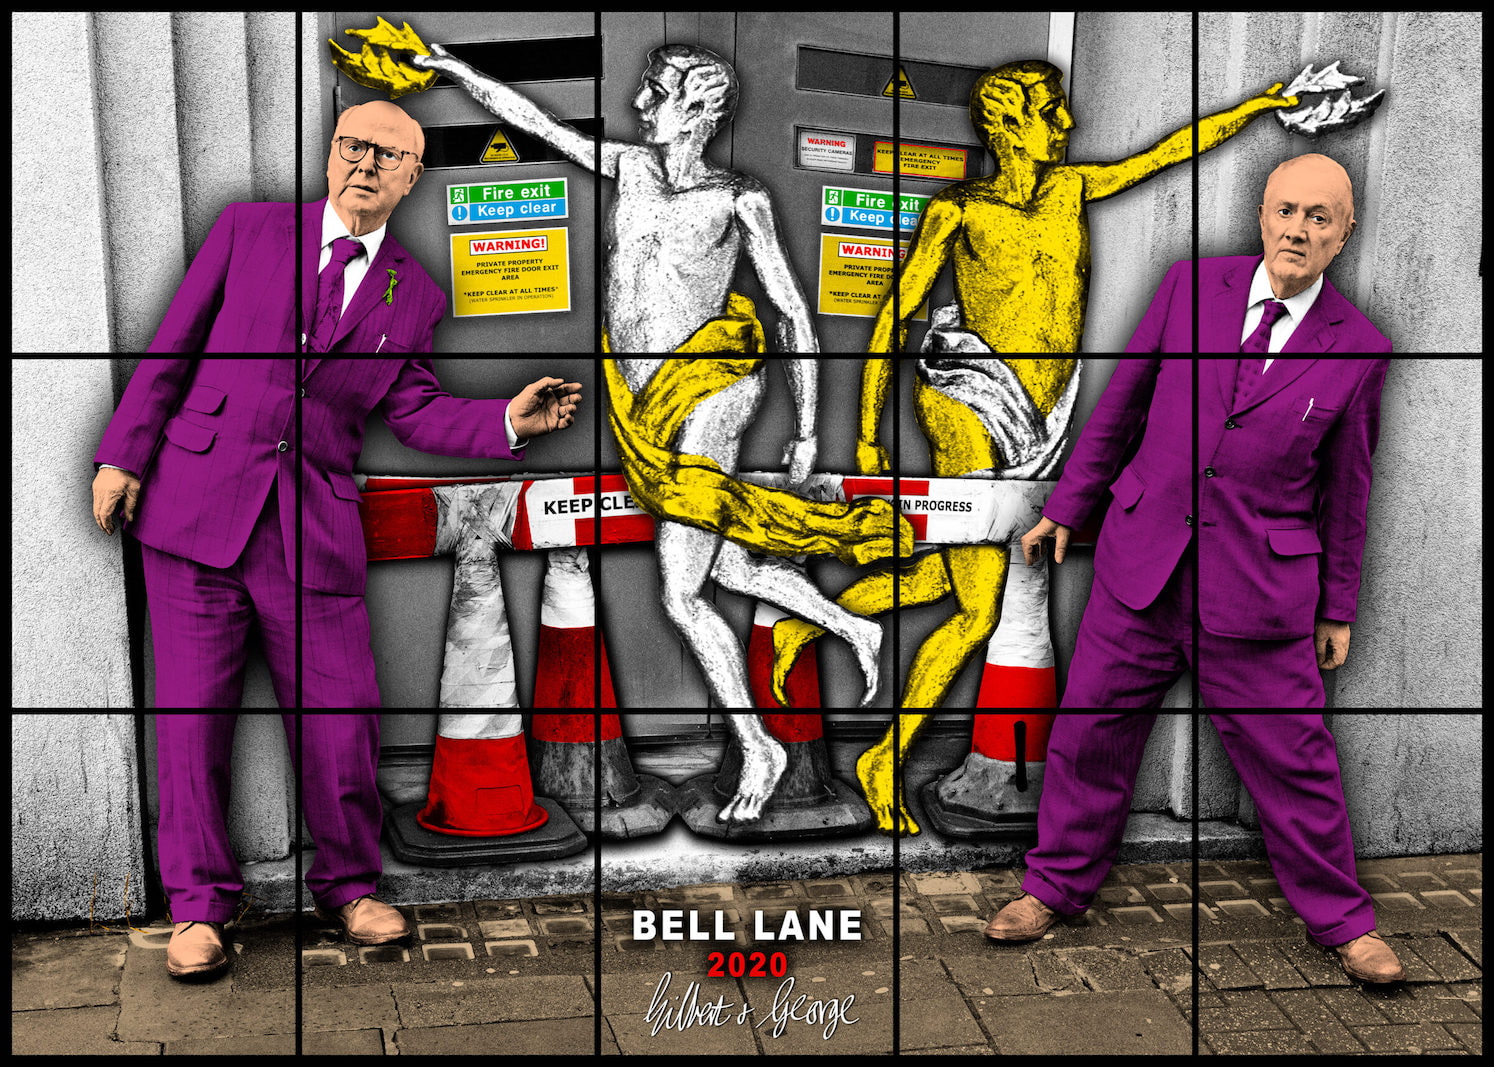 The Gilbert & George Centre to open in East London in April